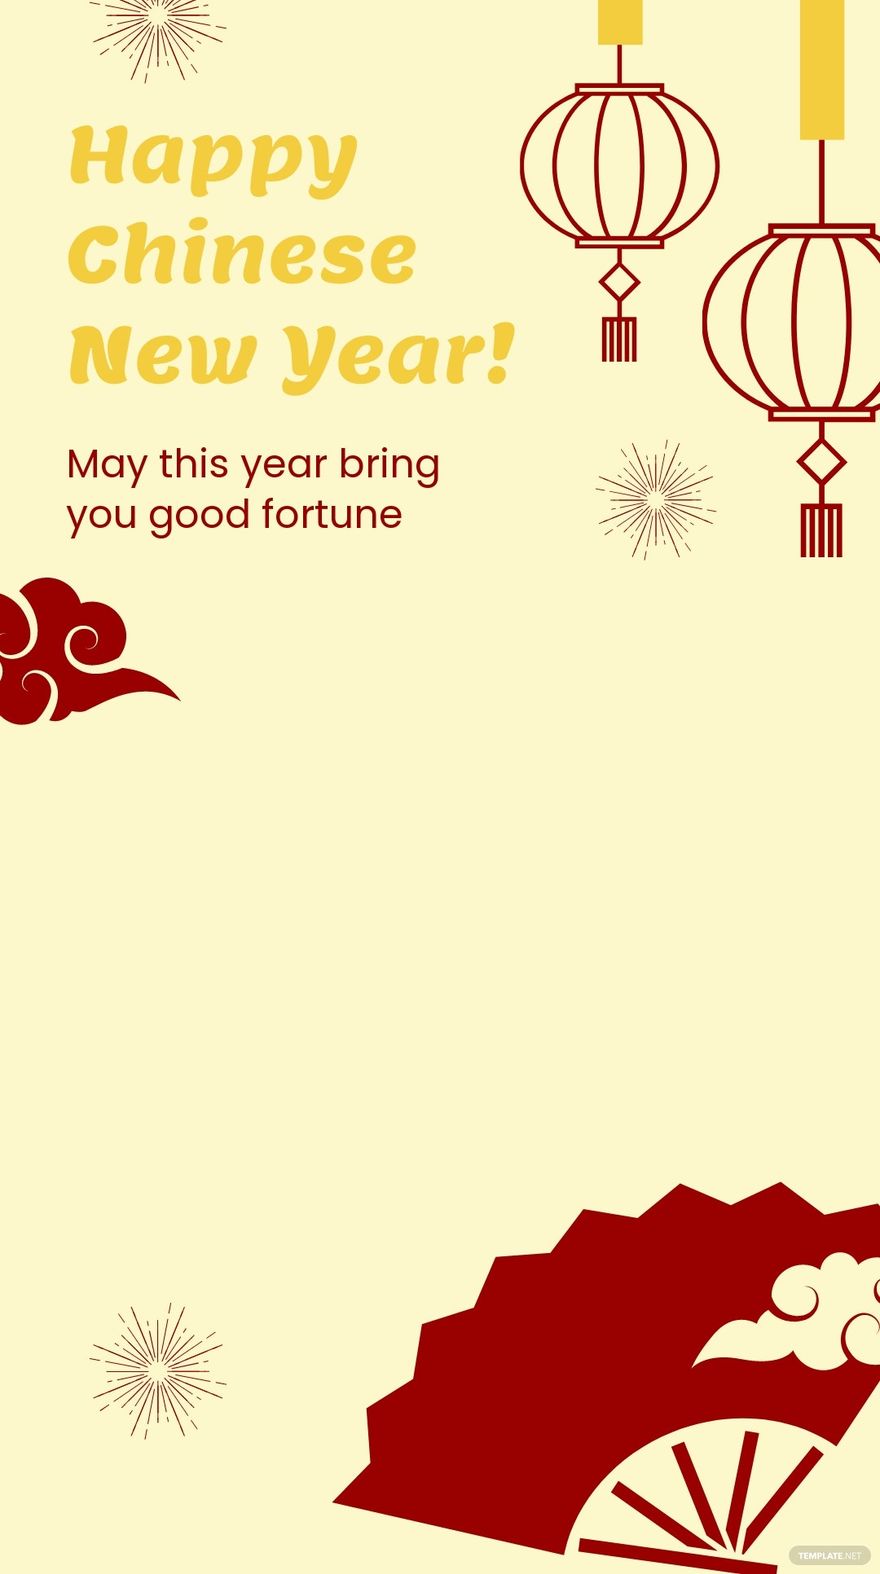 Chinese New Year Greeting Snapchat Geofilter